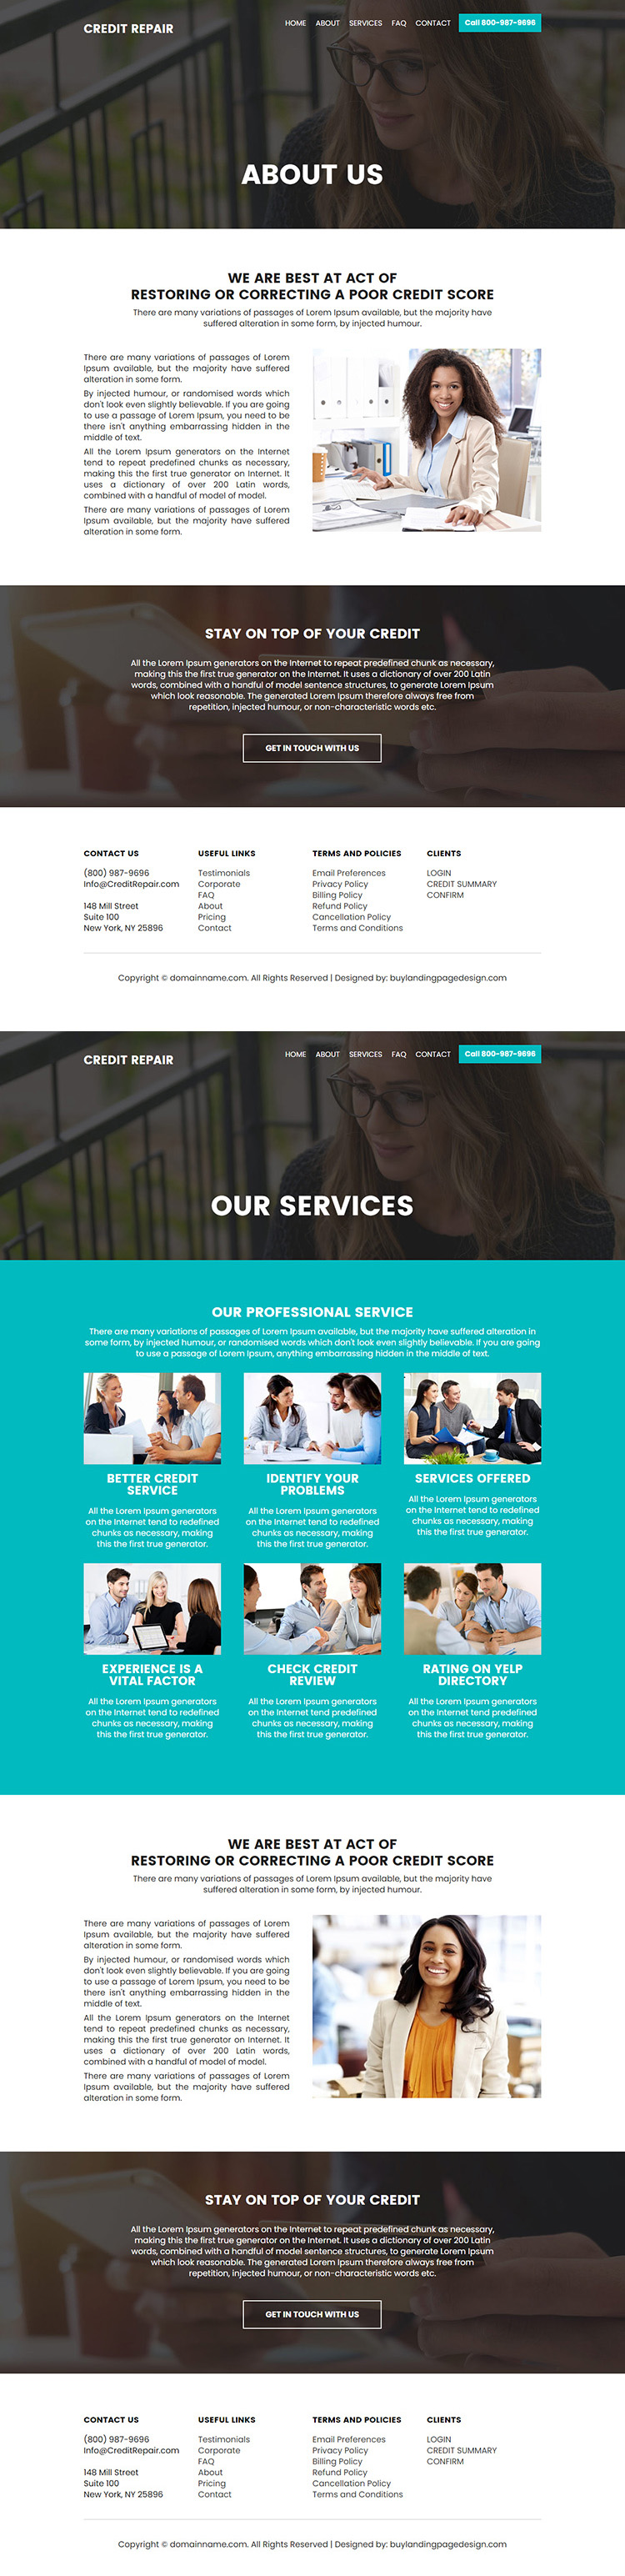 credit repair company free consultation lead capturing landing page